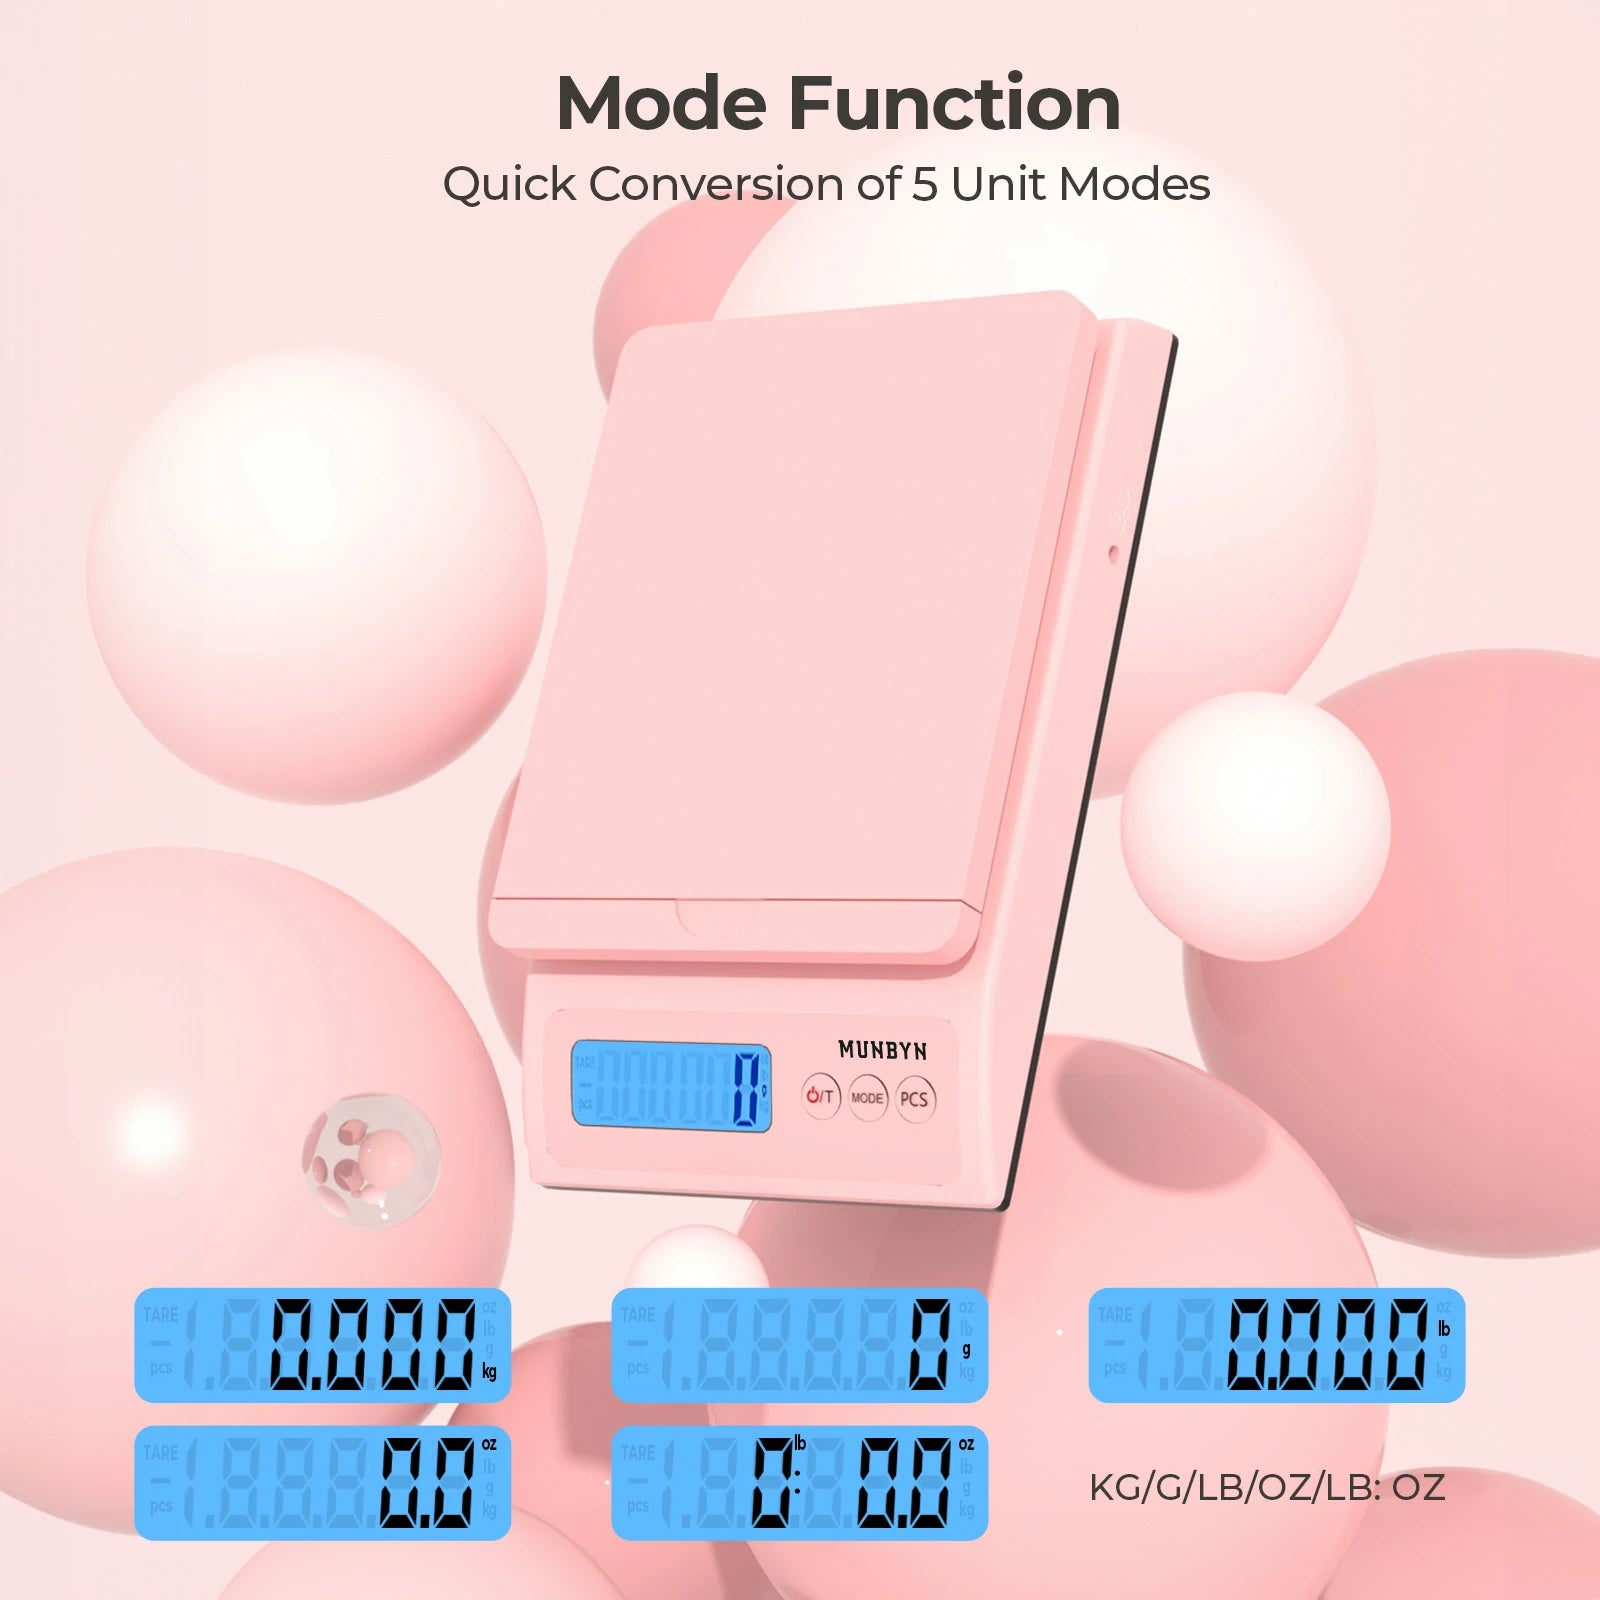 MUNBYN 66lb/0.1oz Postal Scale with Sweet Pink Style